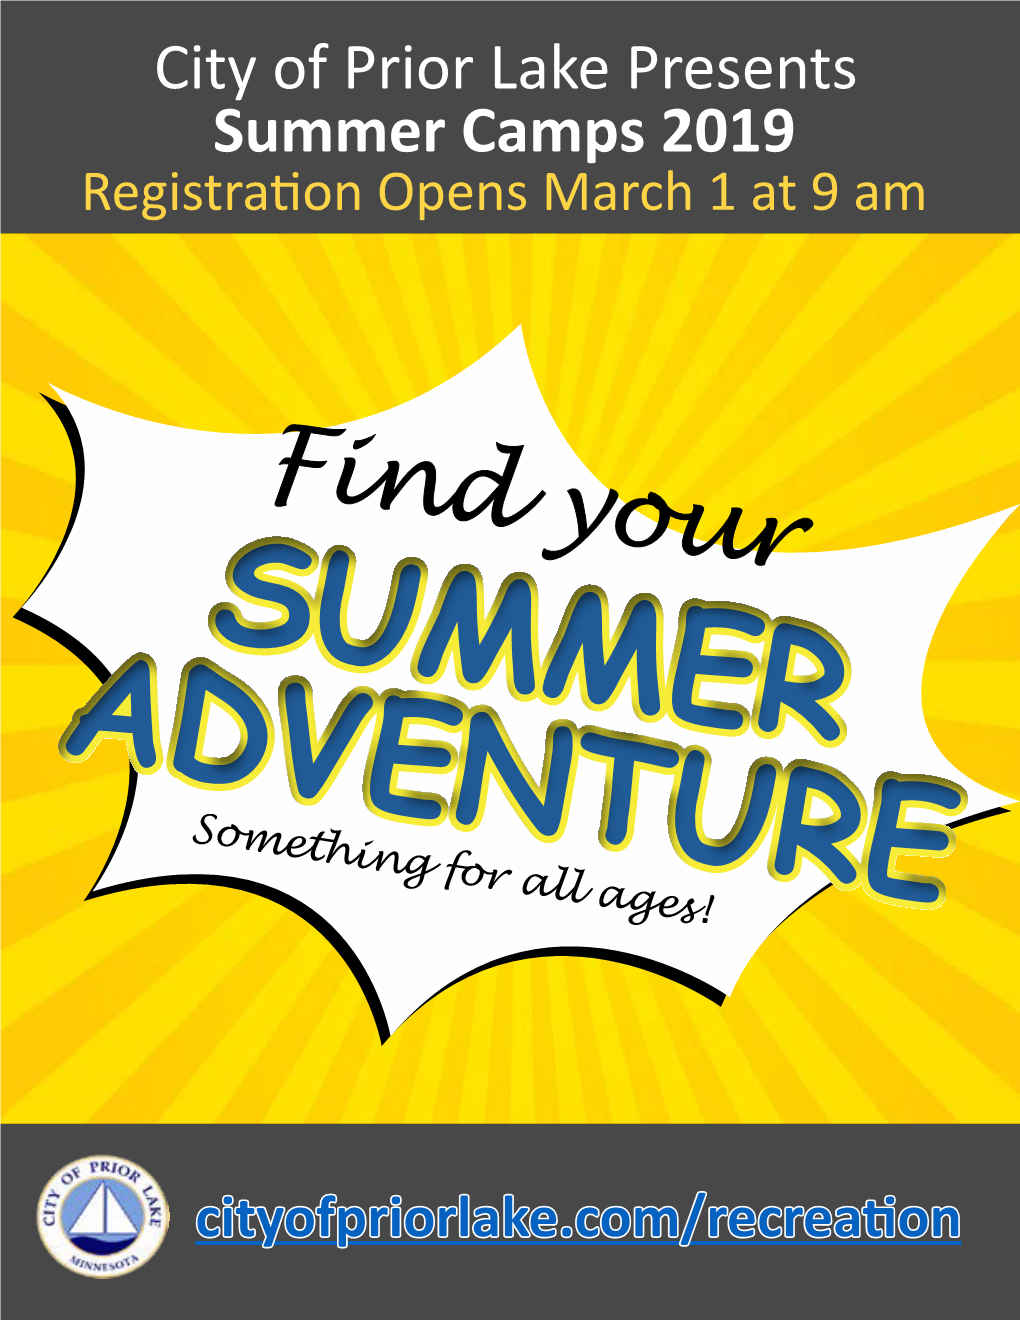 Find Your SUMMER ADVENTURE Something for All Ages!